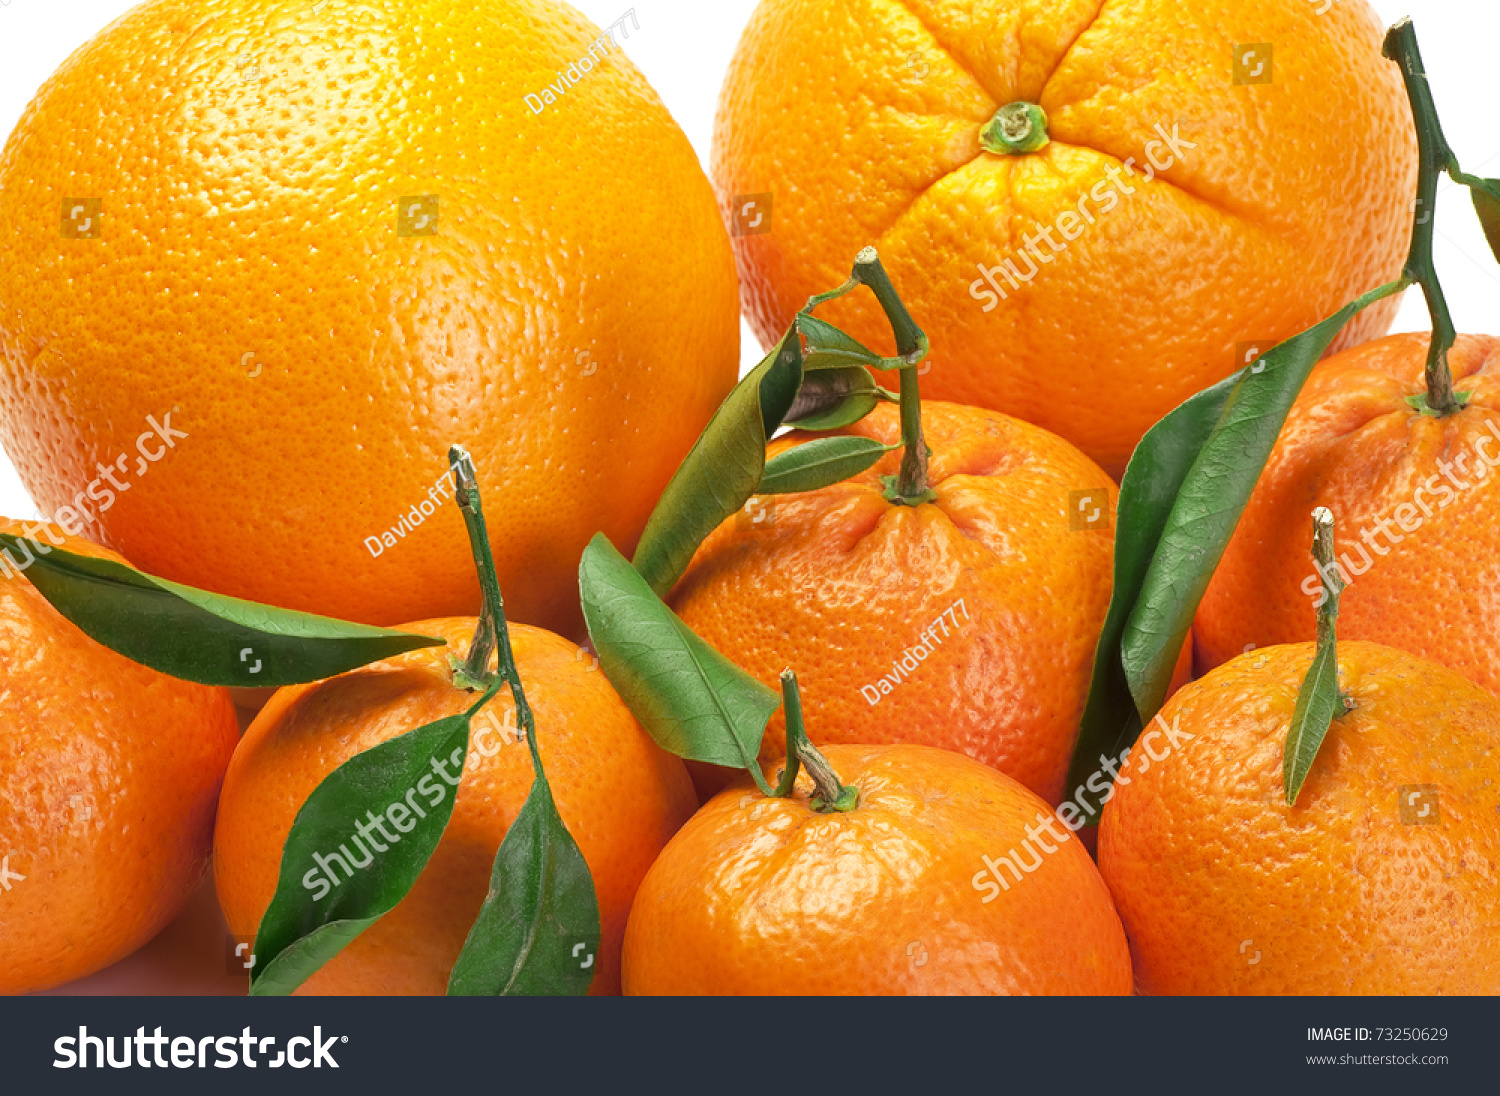 Oranges And Tangerines Of Orange Color Sweet Isolated A White